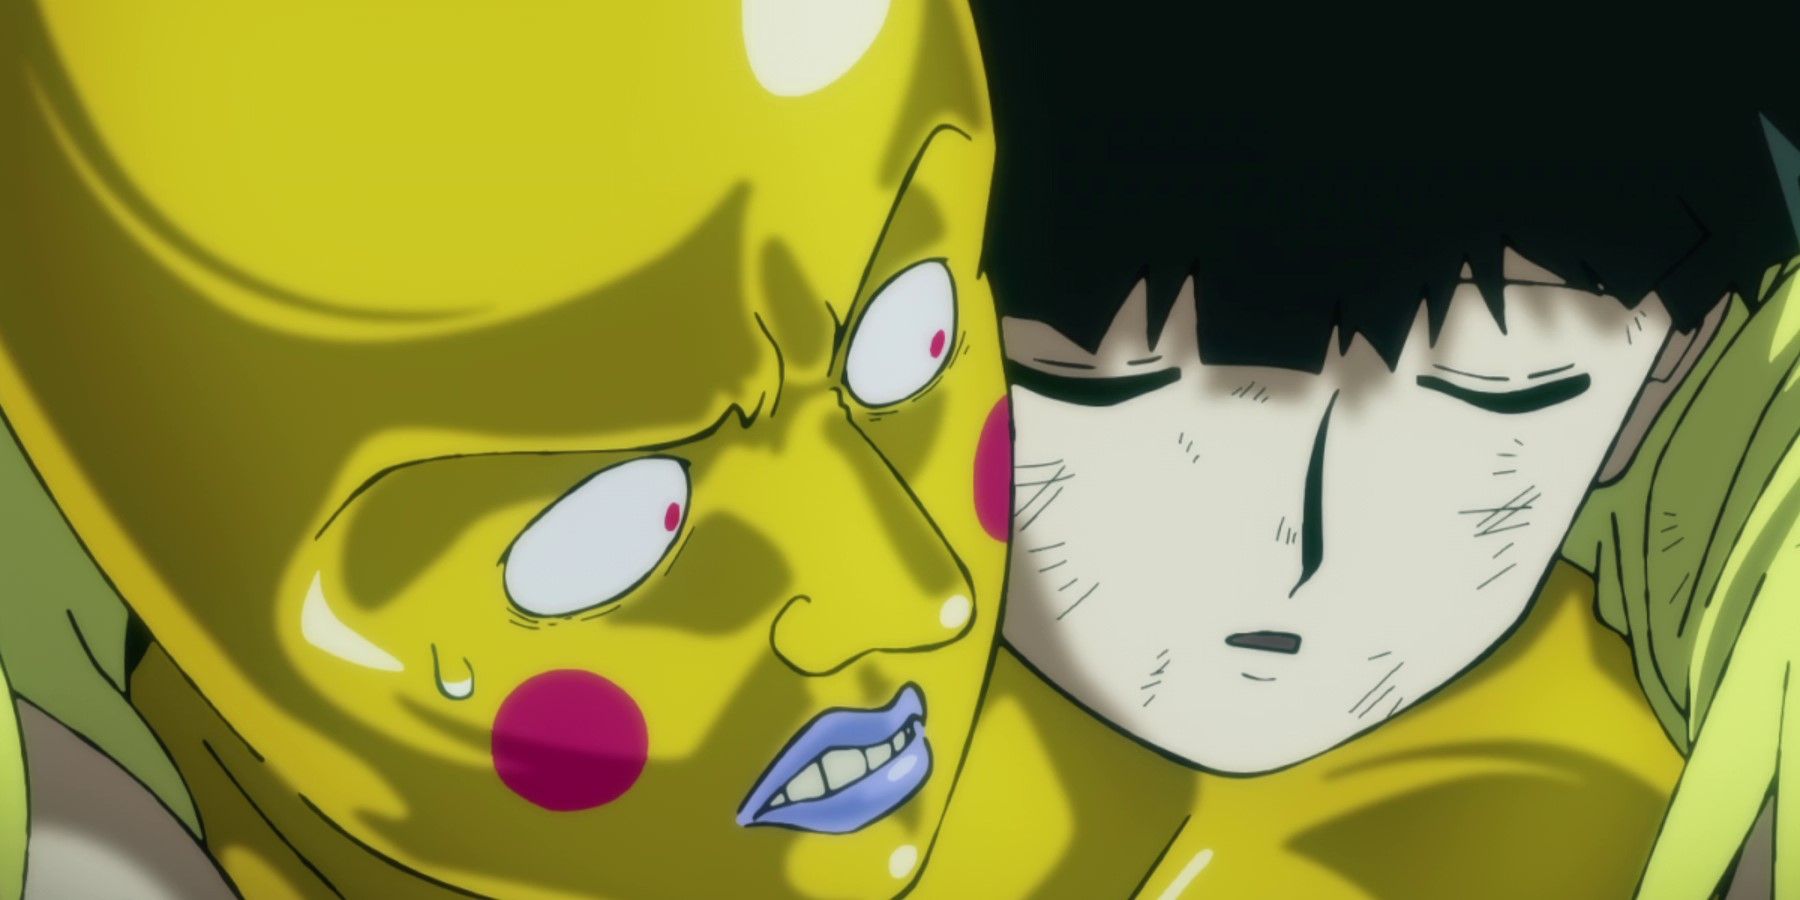 Mob Psycho 100 III episode 6: Release date and time, what to